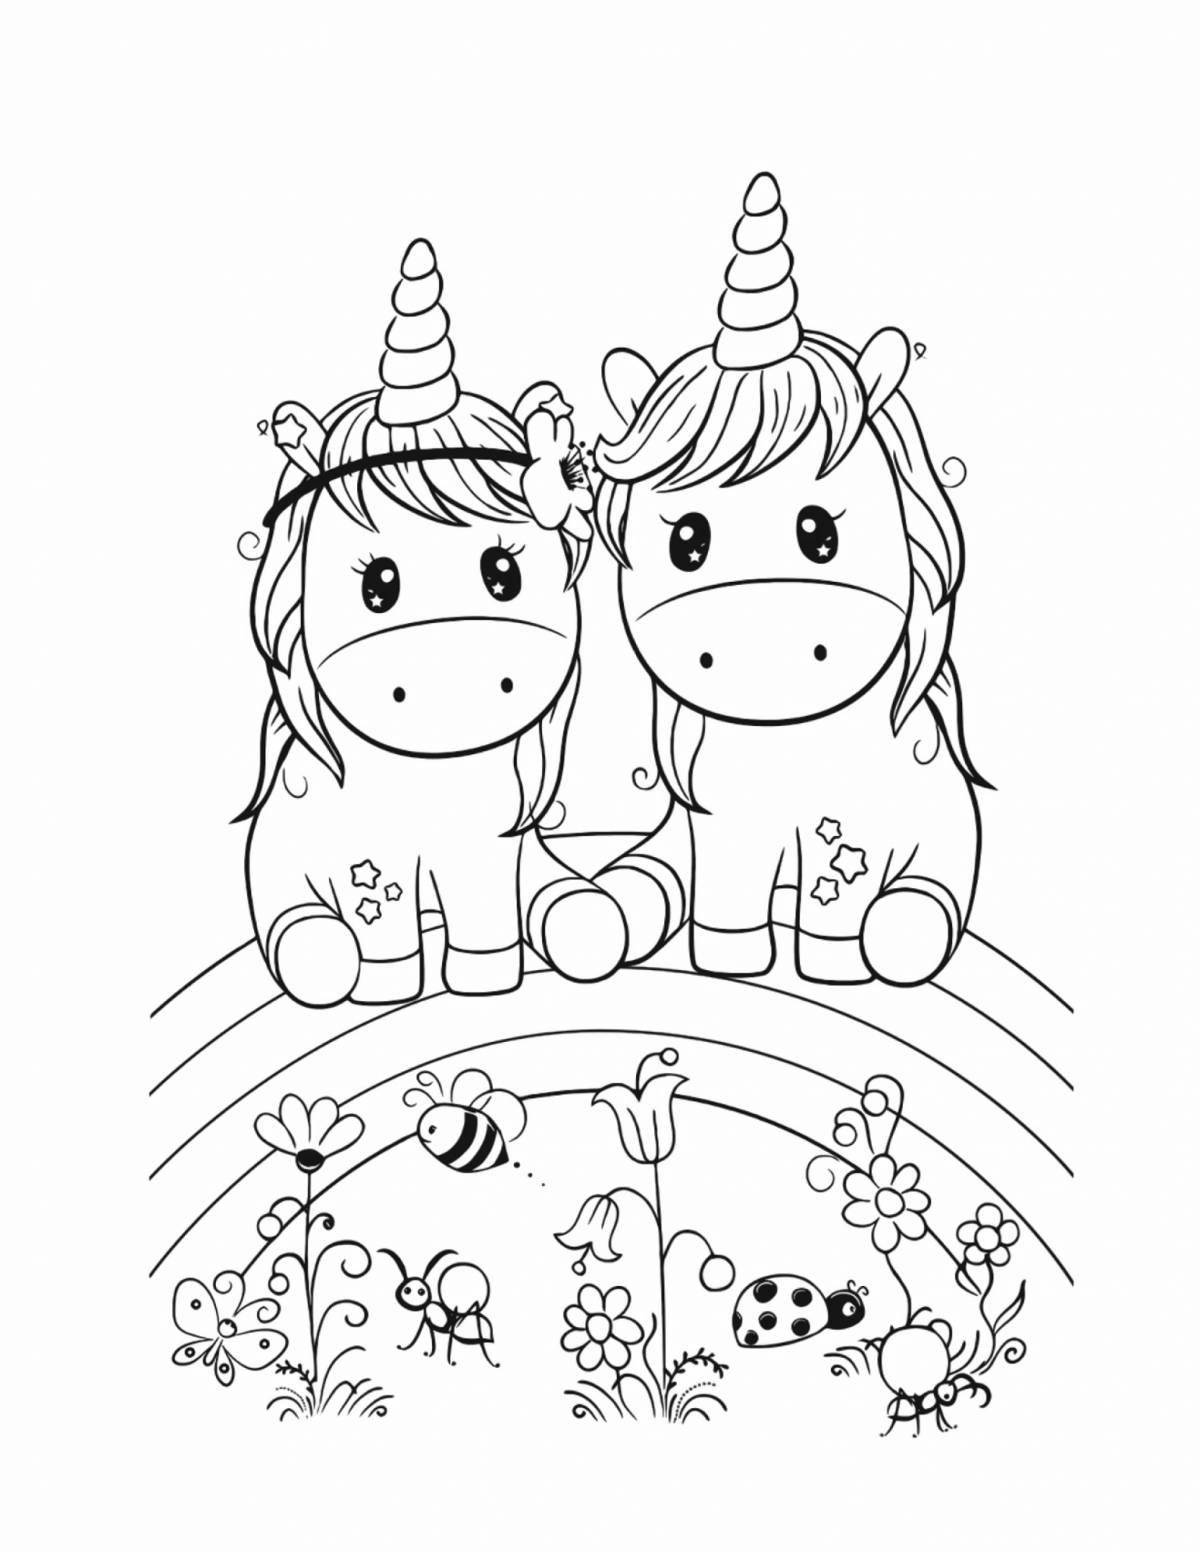 Dazzling coloring book for 5-6 year olds for girls unicorns